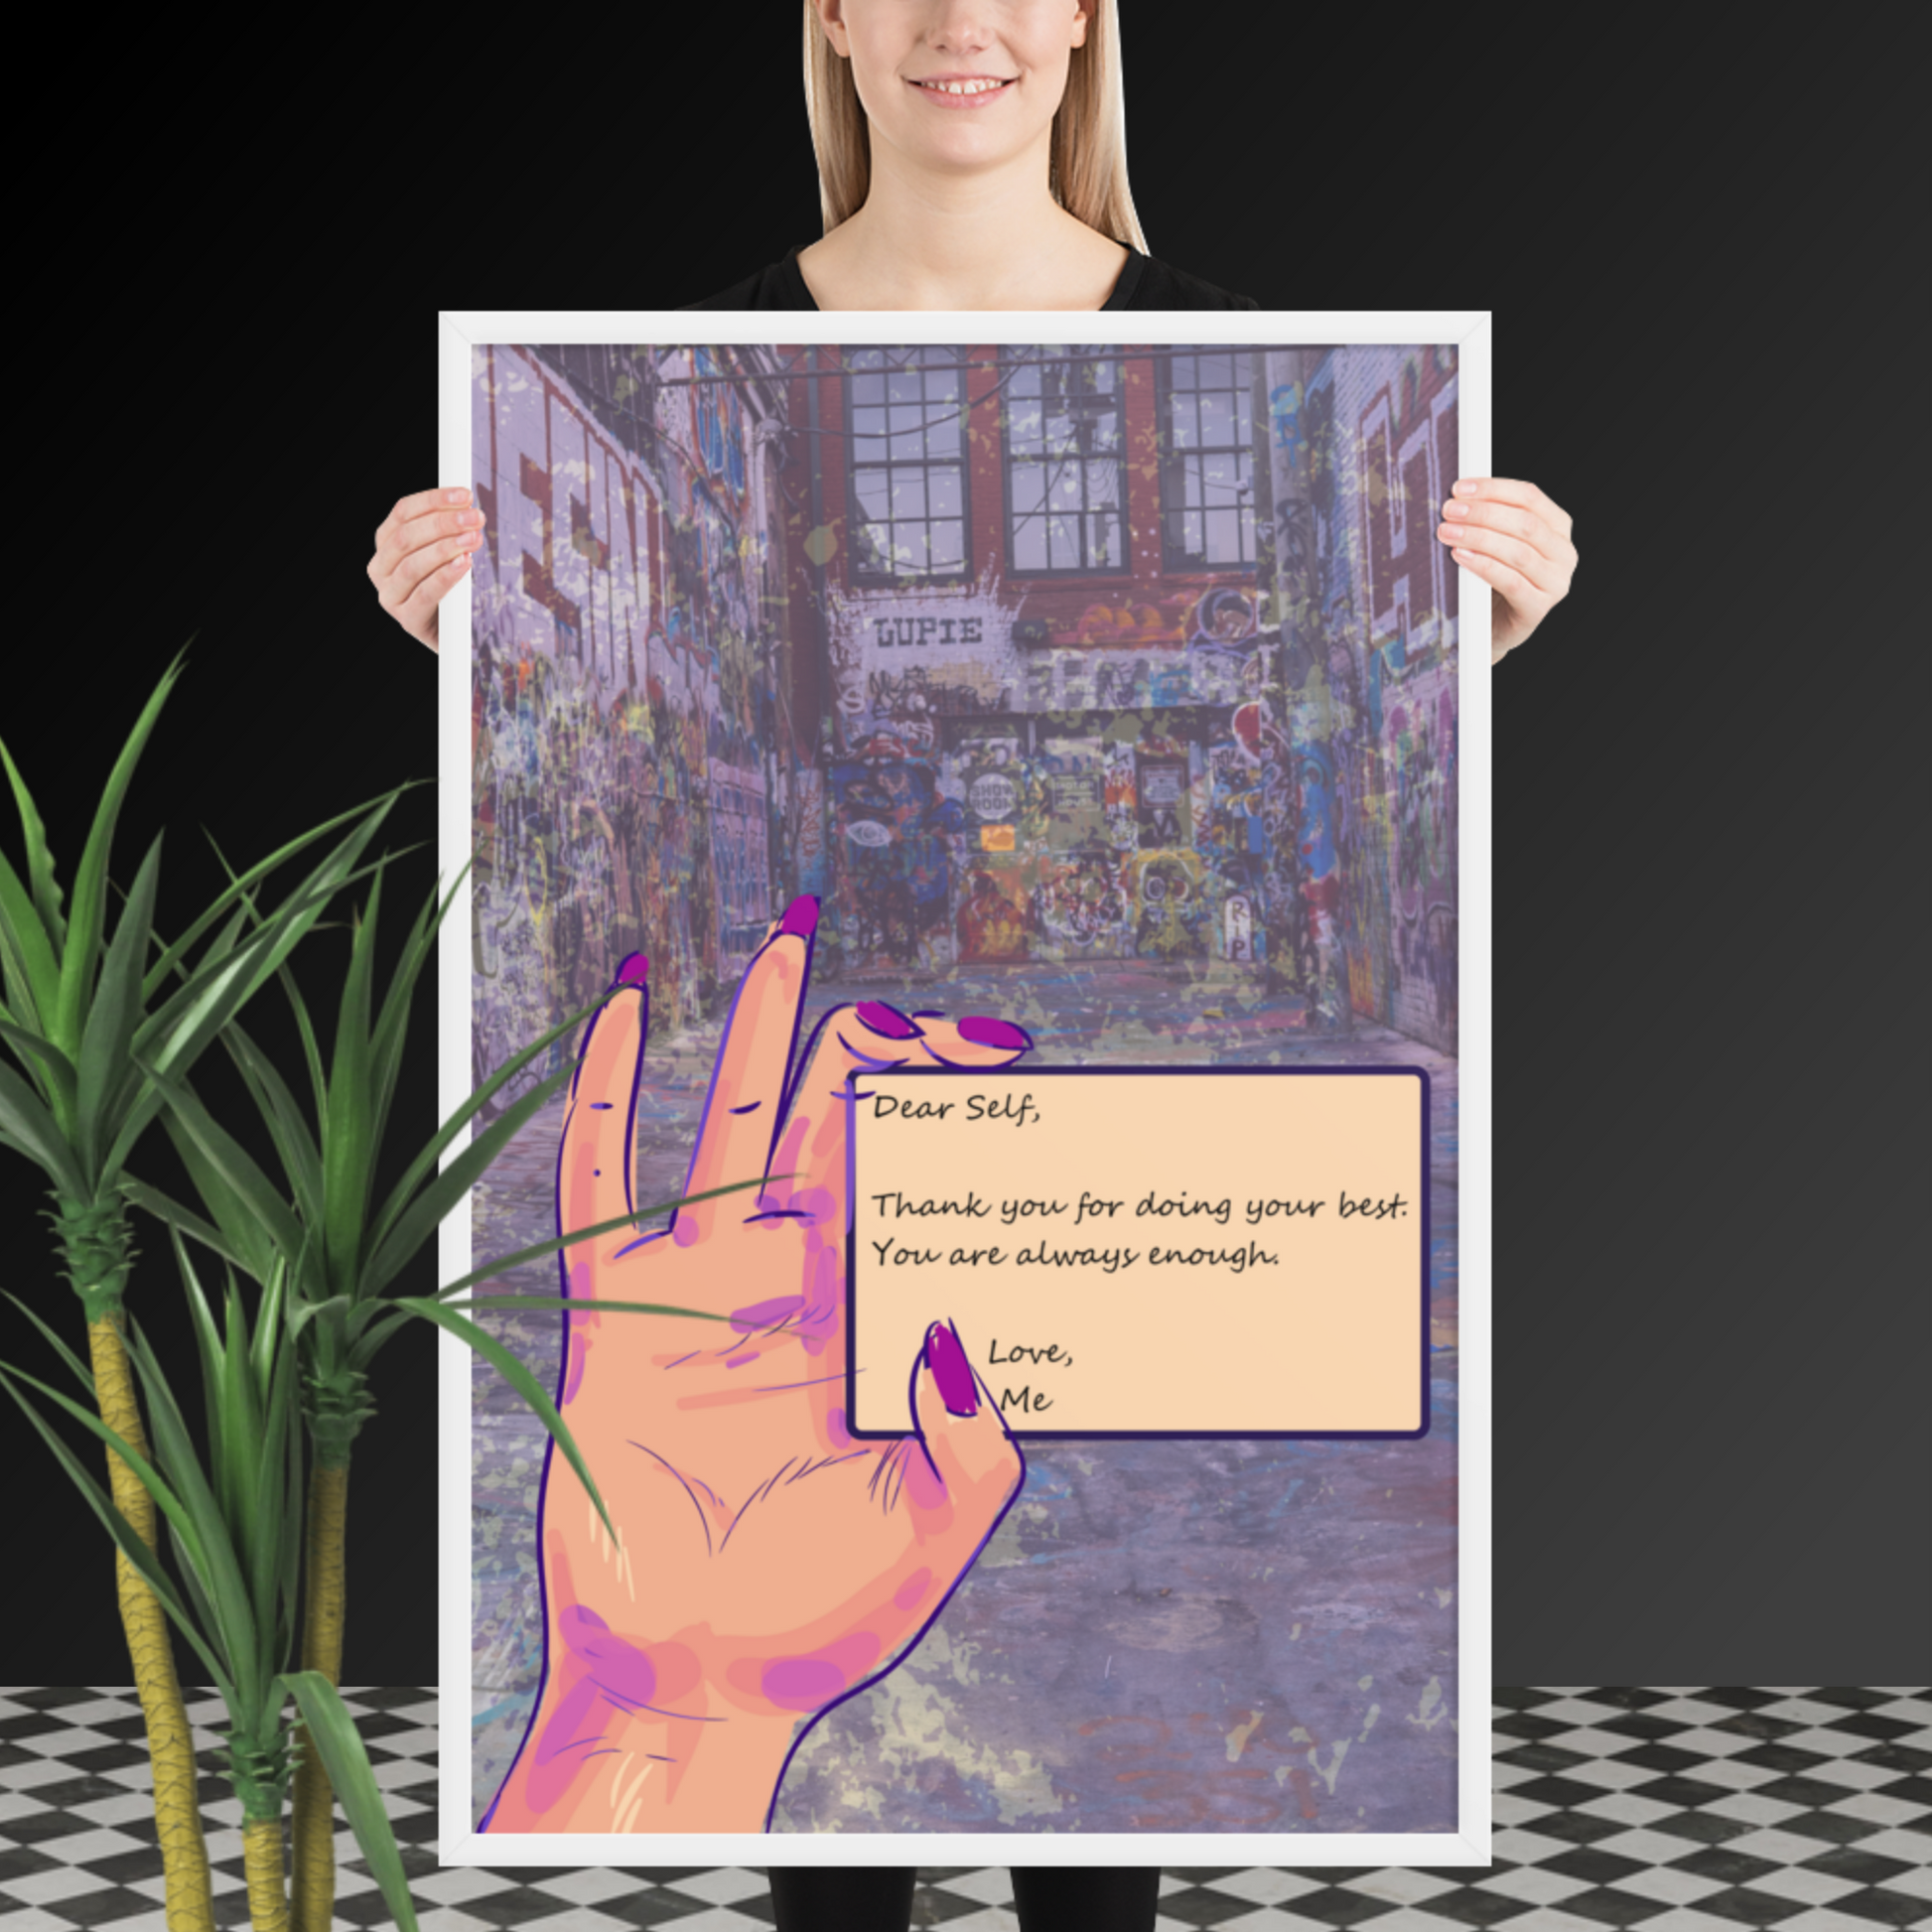 A woman holding up a poster with an image of a hand promoting Empowering 'Self Love Letter' Mixed Media Graffiti Art - Printable Wall Art Quotes to Inspire Self-Compassion.